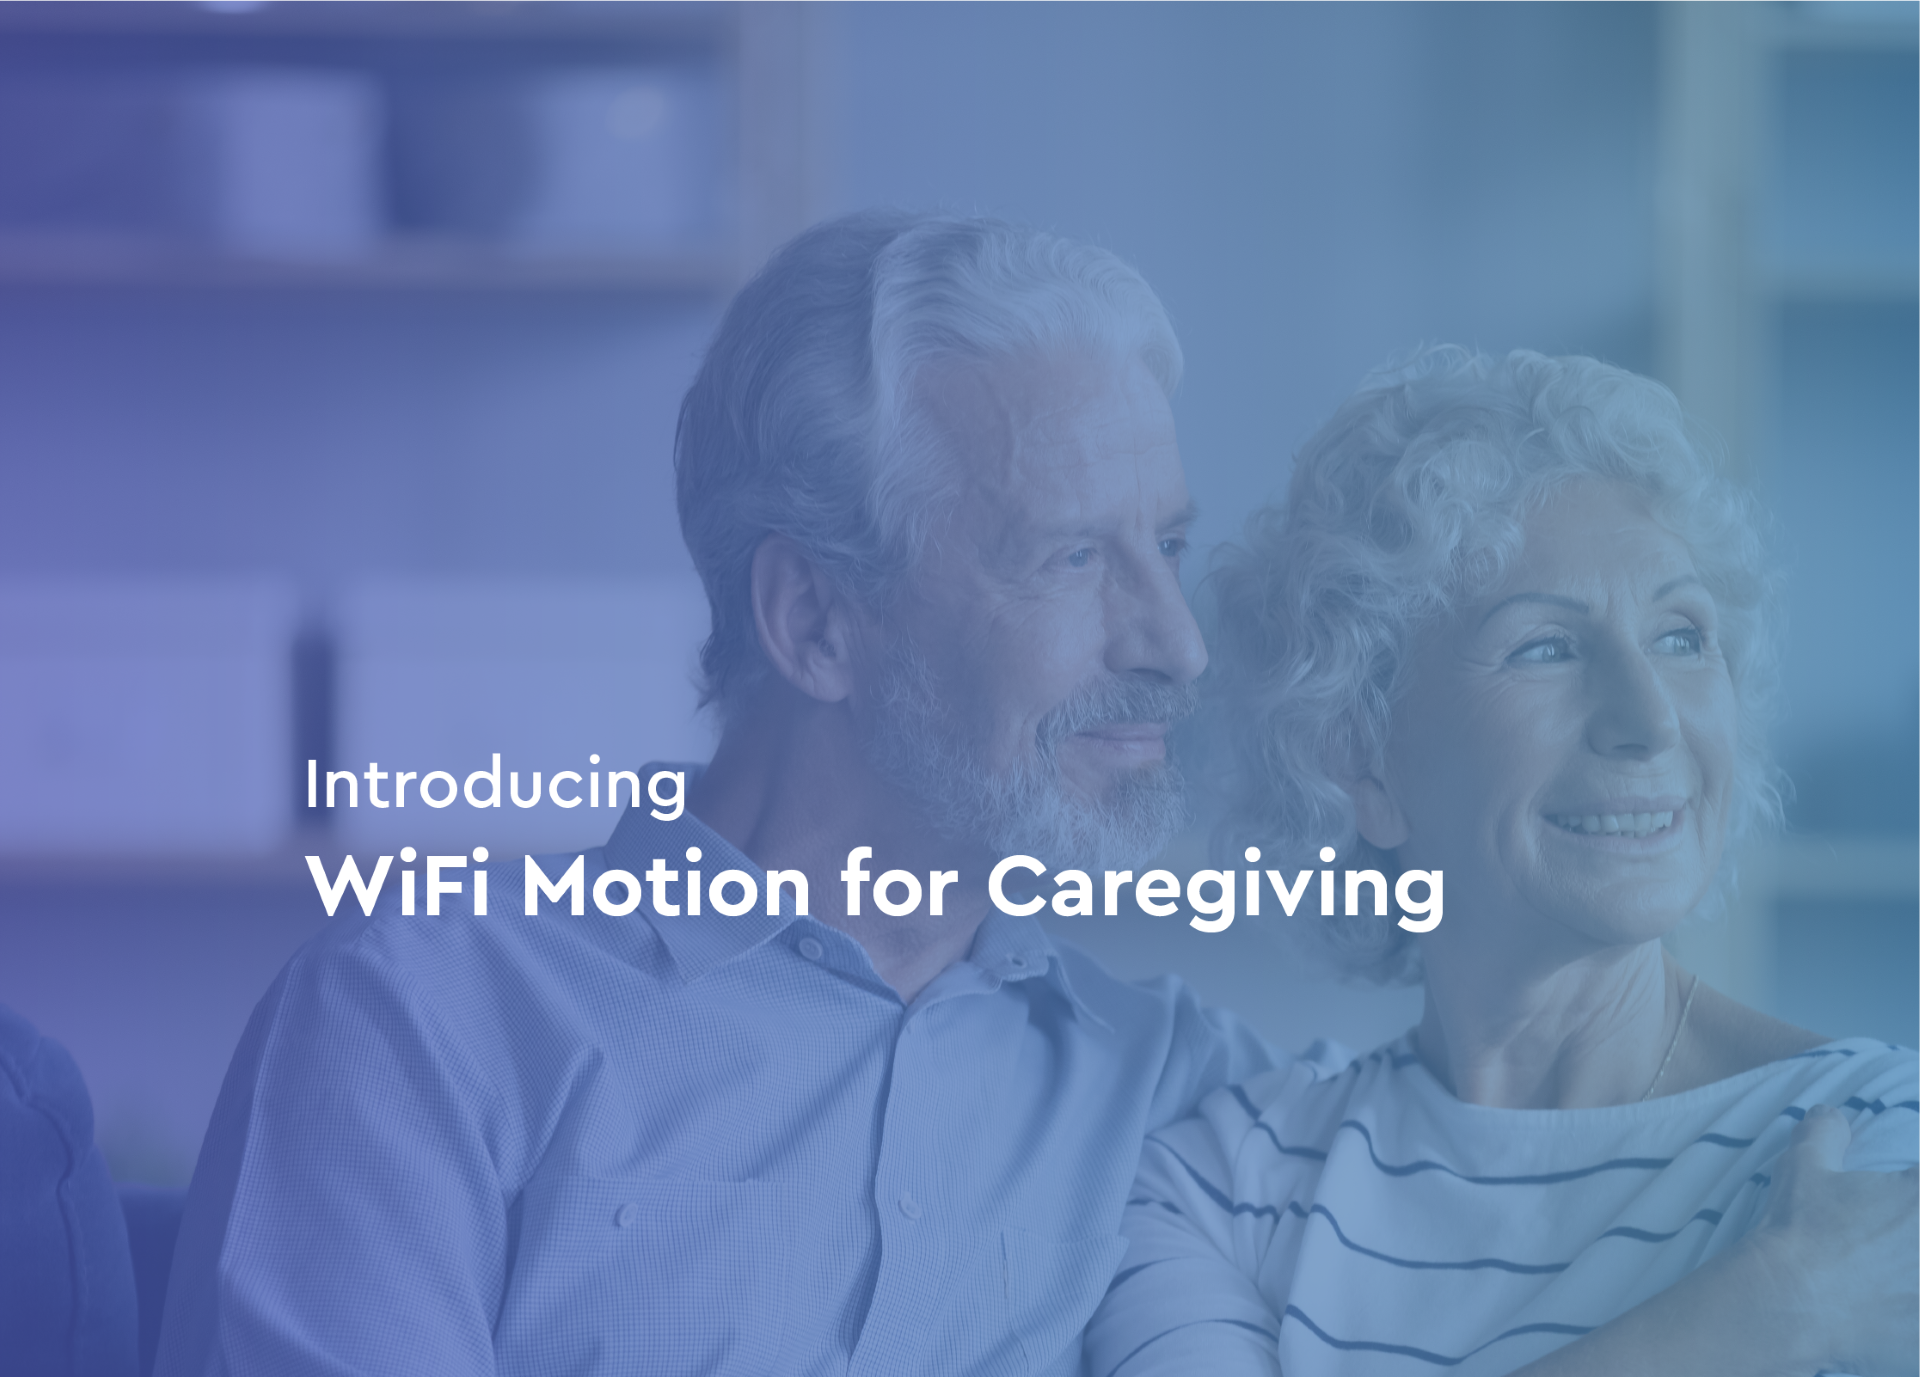 Title text "Introducing WiFi Motion for Caregiving" over a background of an elderly couple